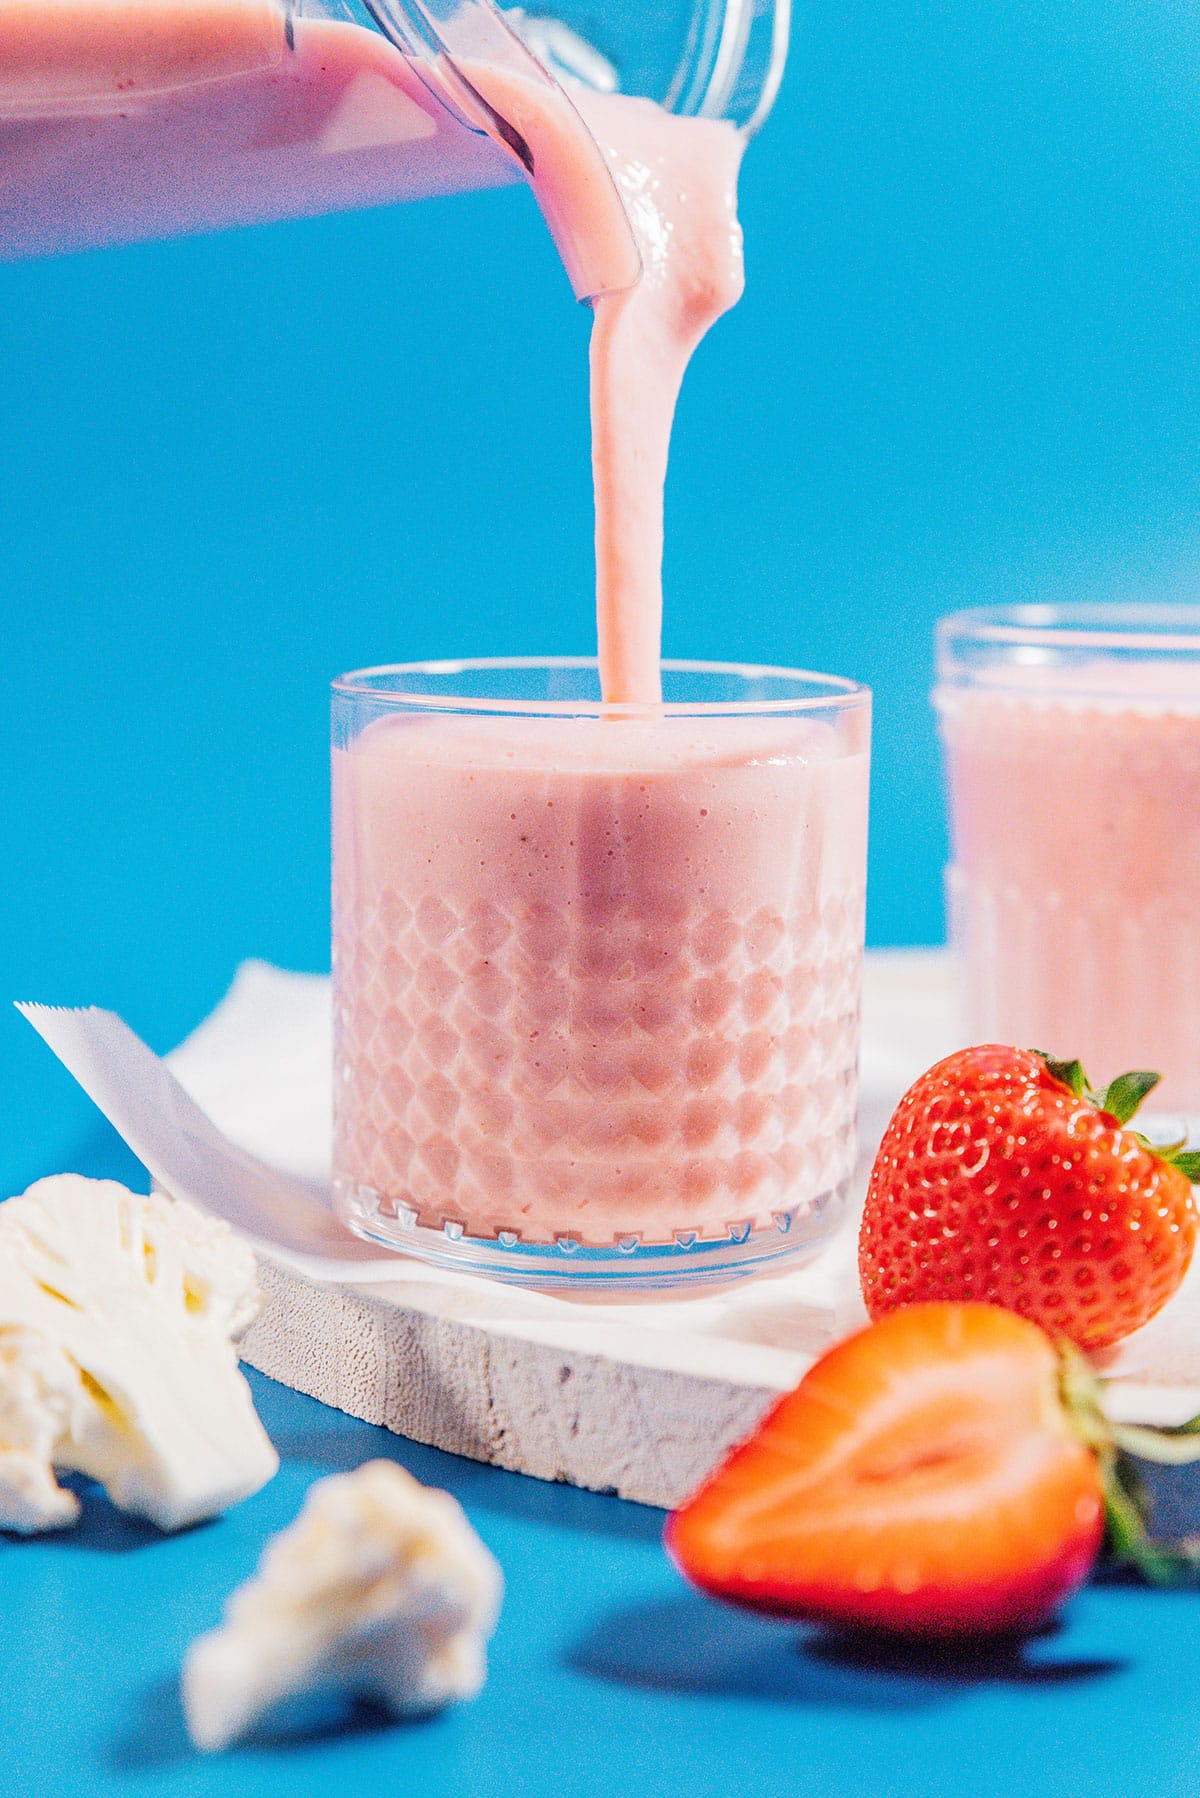 Hidden cauliflower smoothie with strawberry and paper straws in a glass on a blue background.